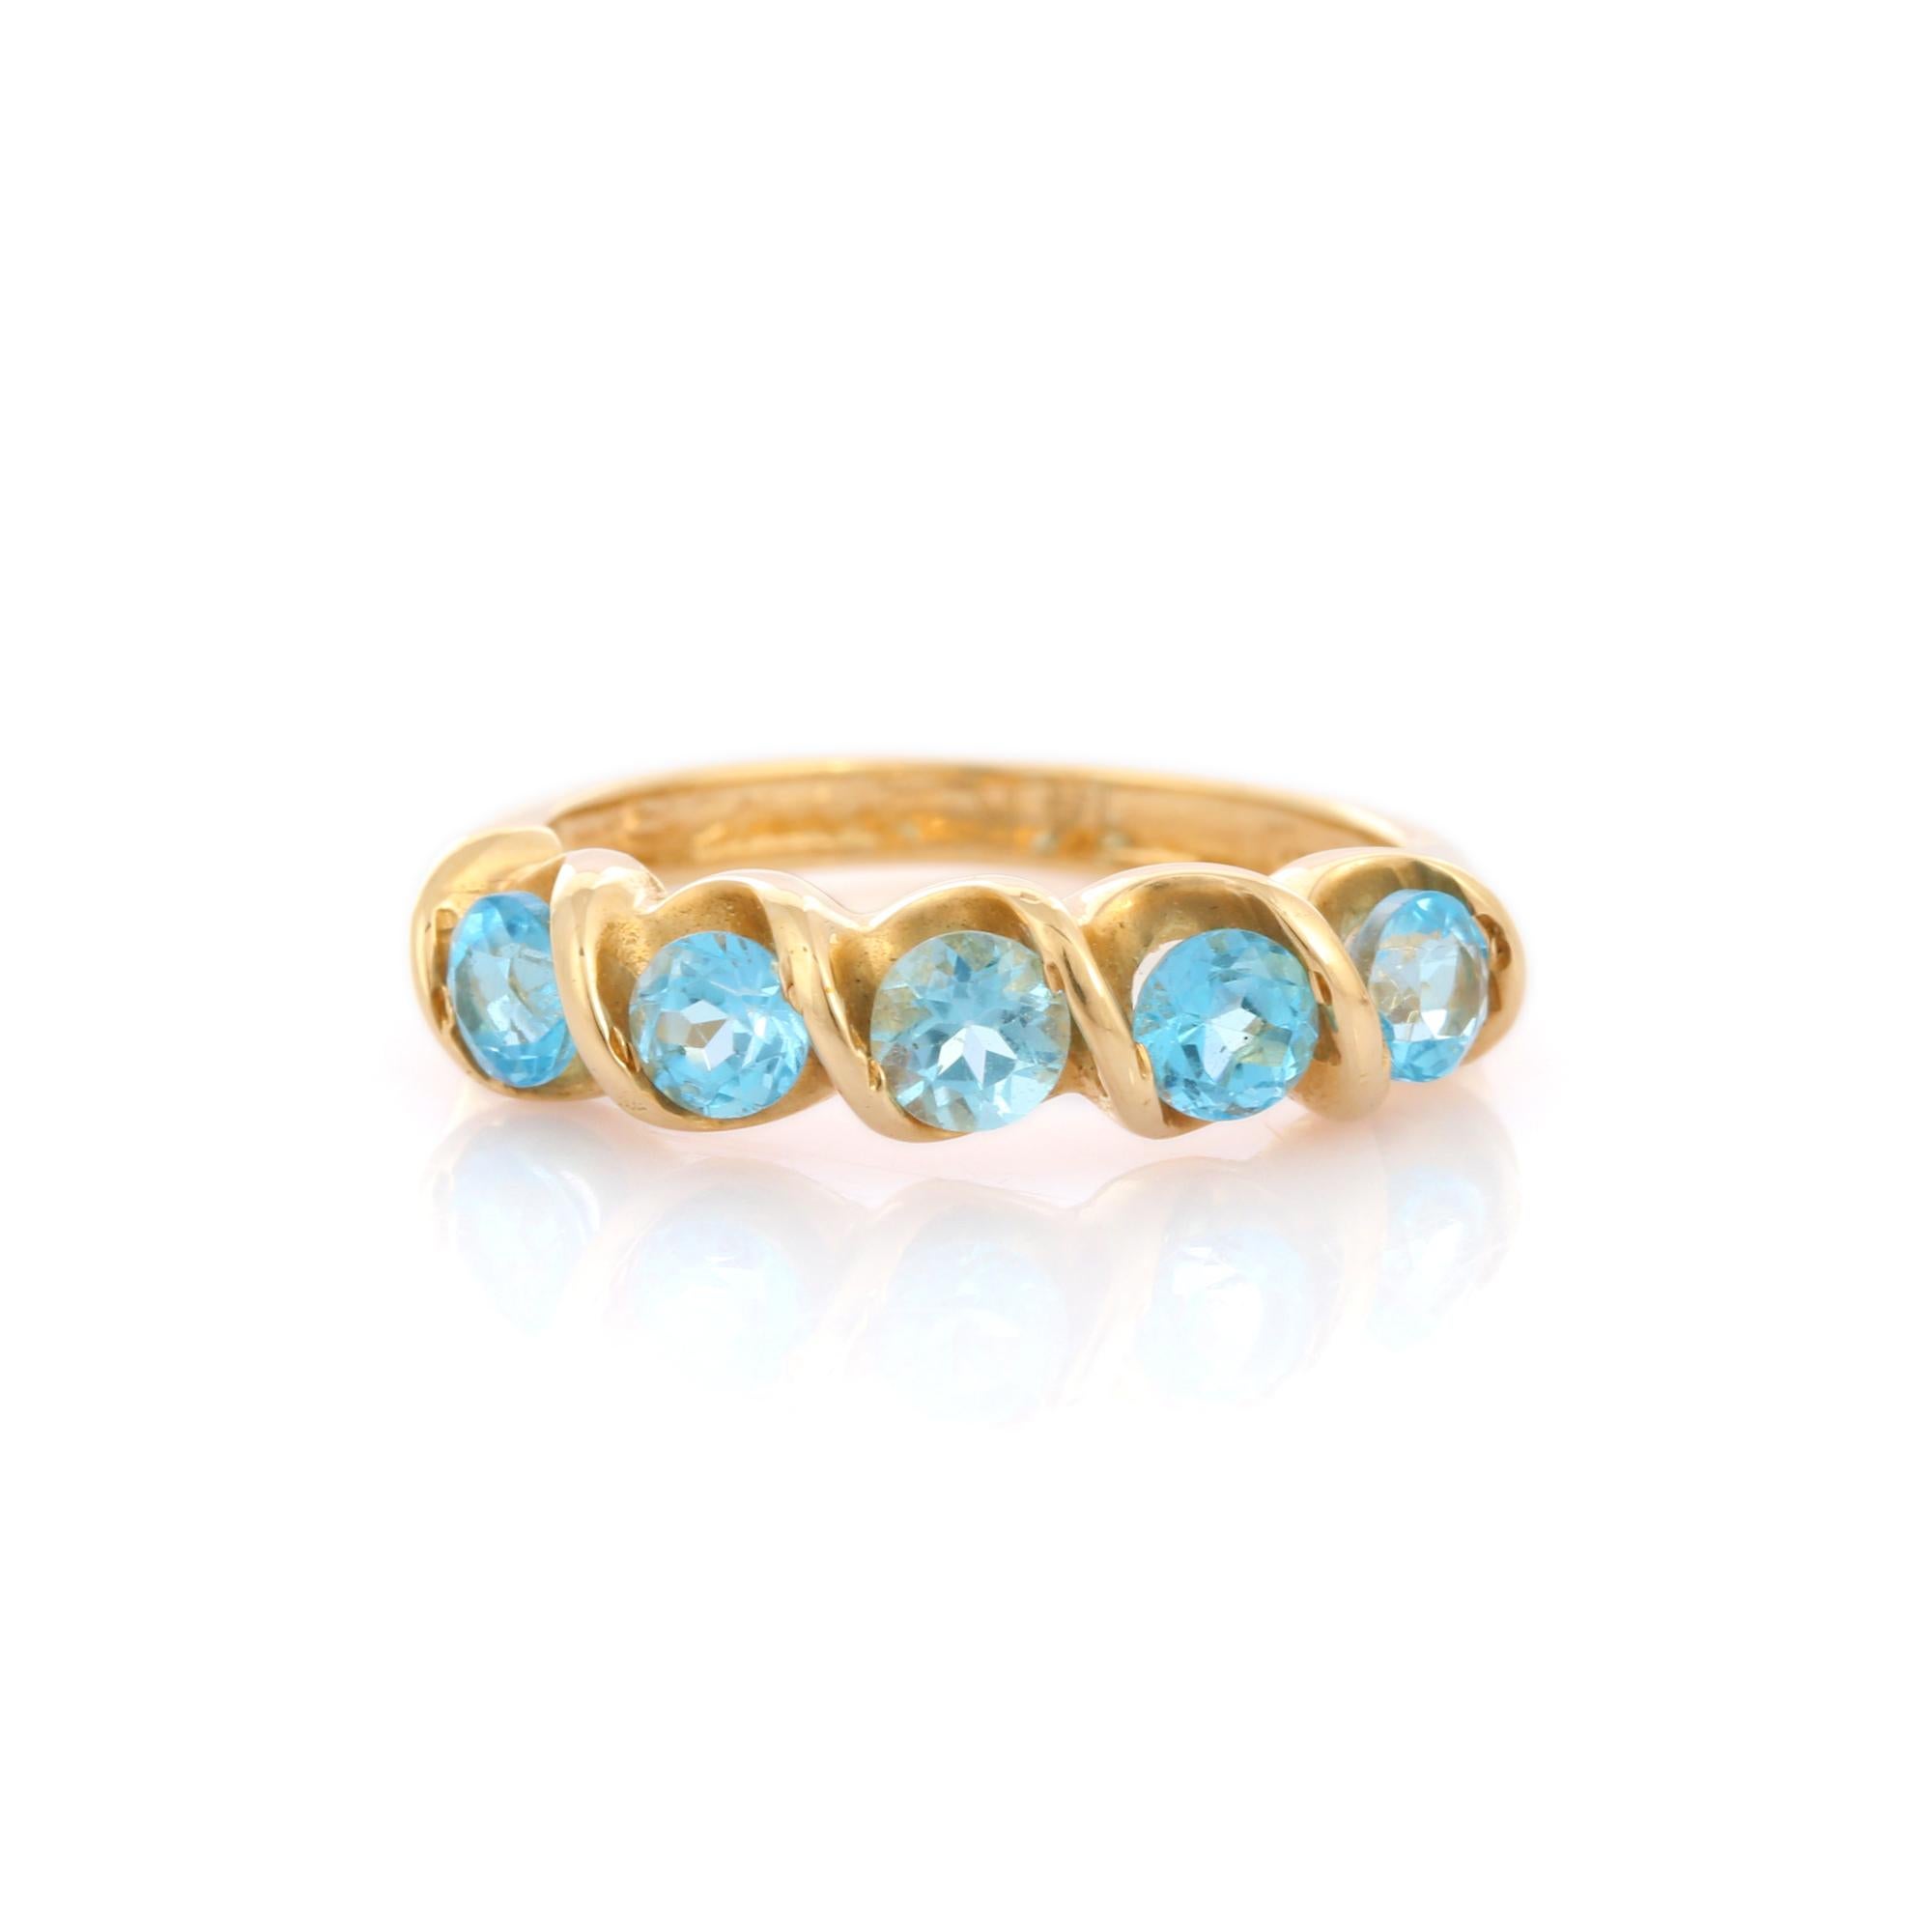 For Sale:  Blue Topaz Band Ring in 14k Solid Yellow Gold, December Birthstone Band 9